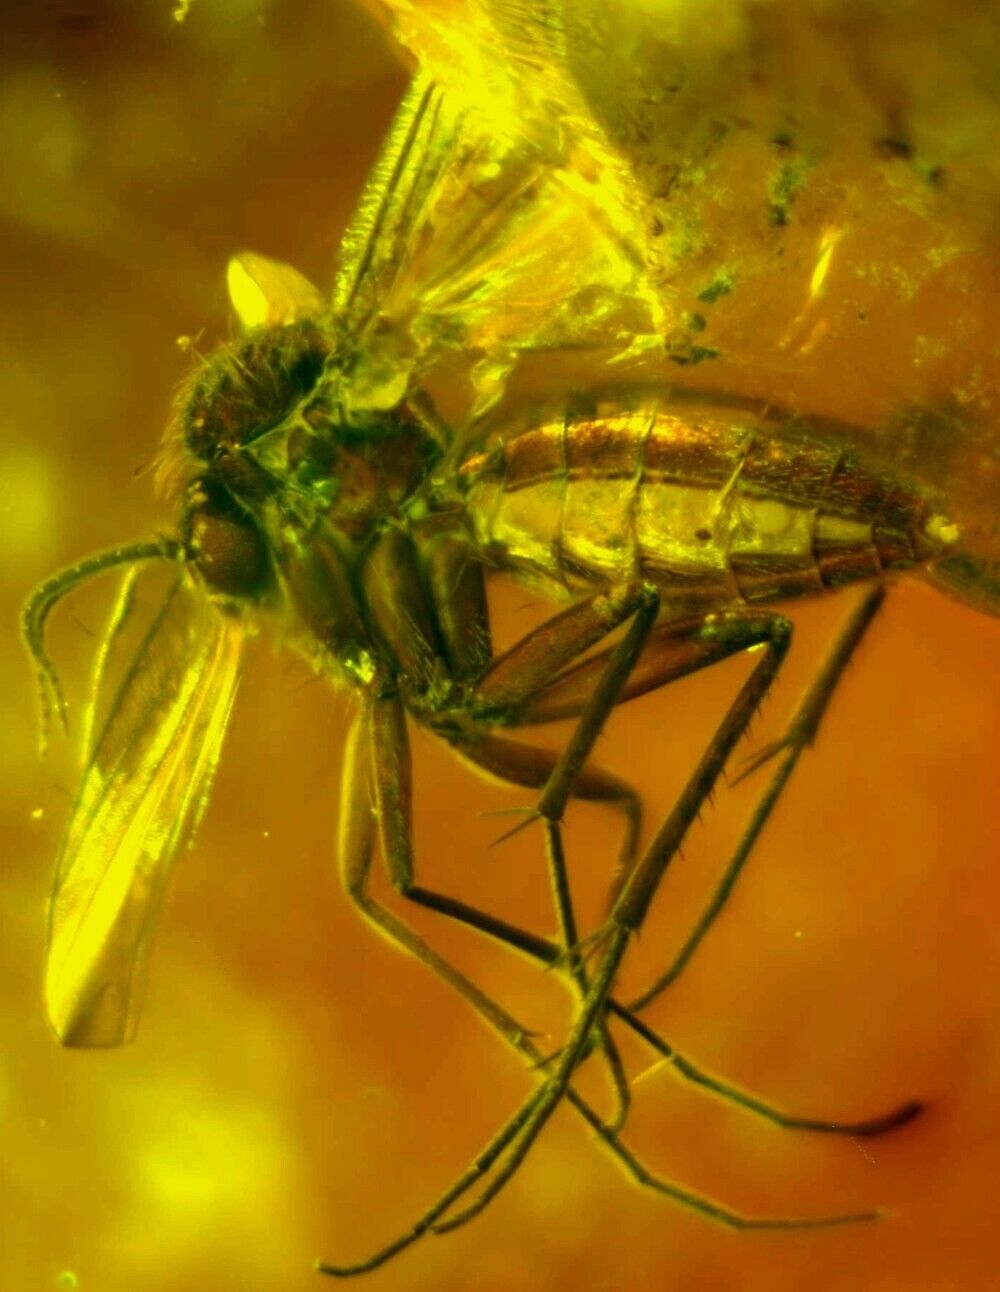 Fossil Fly (Diptera) in Amber (50m Years Old, Poland)